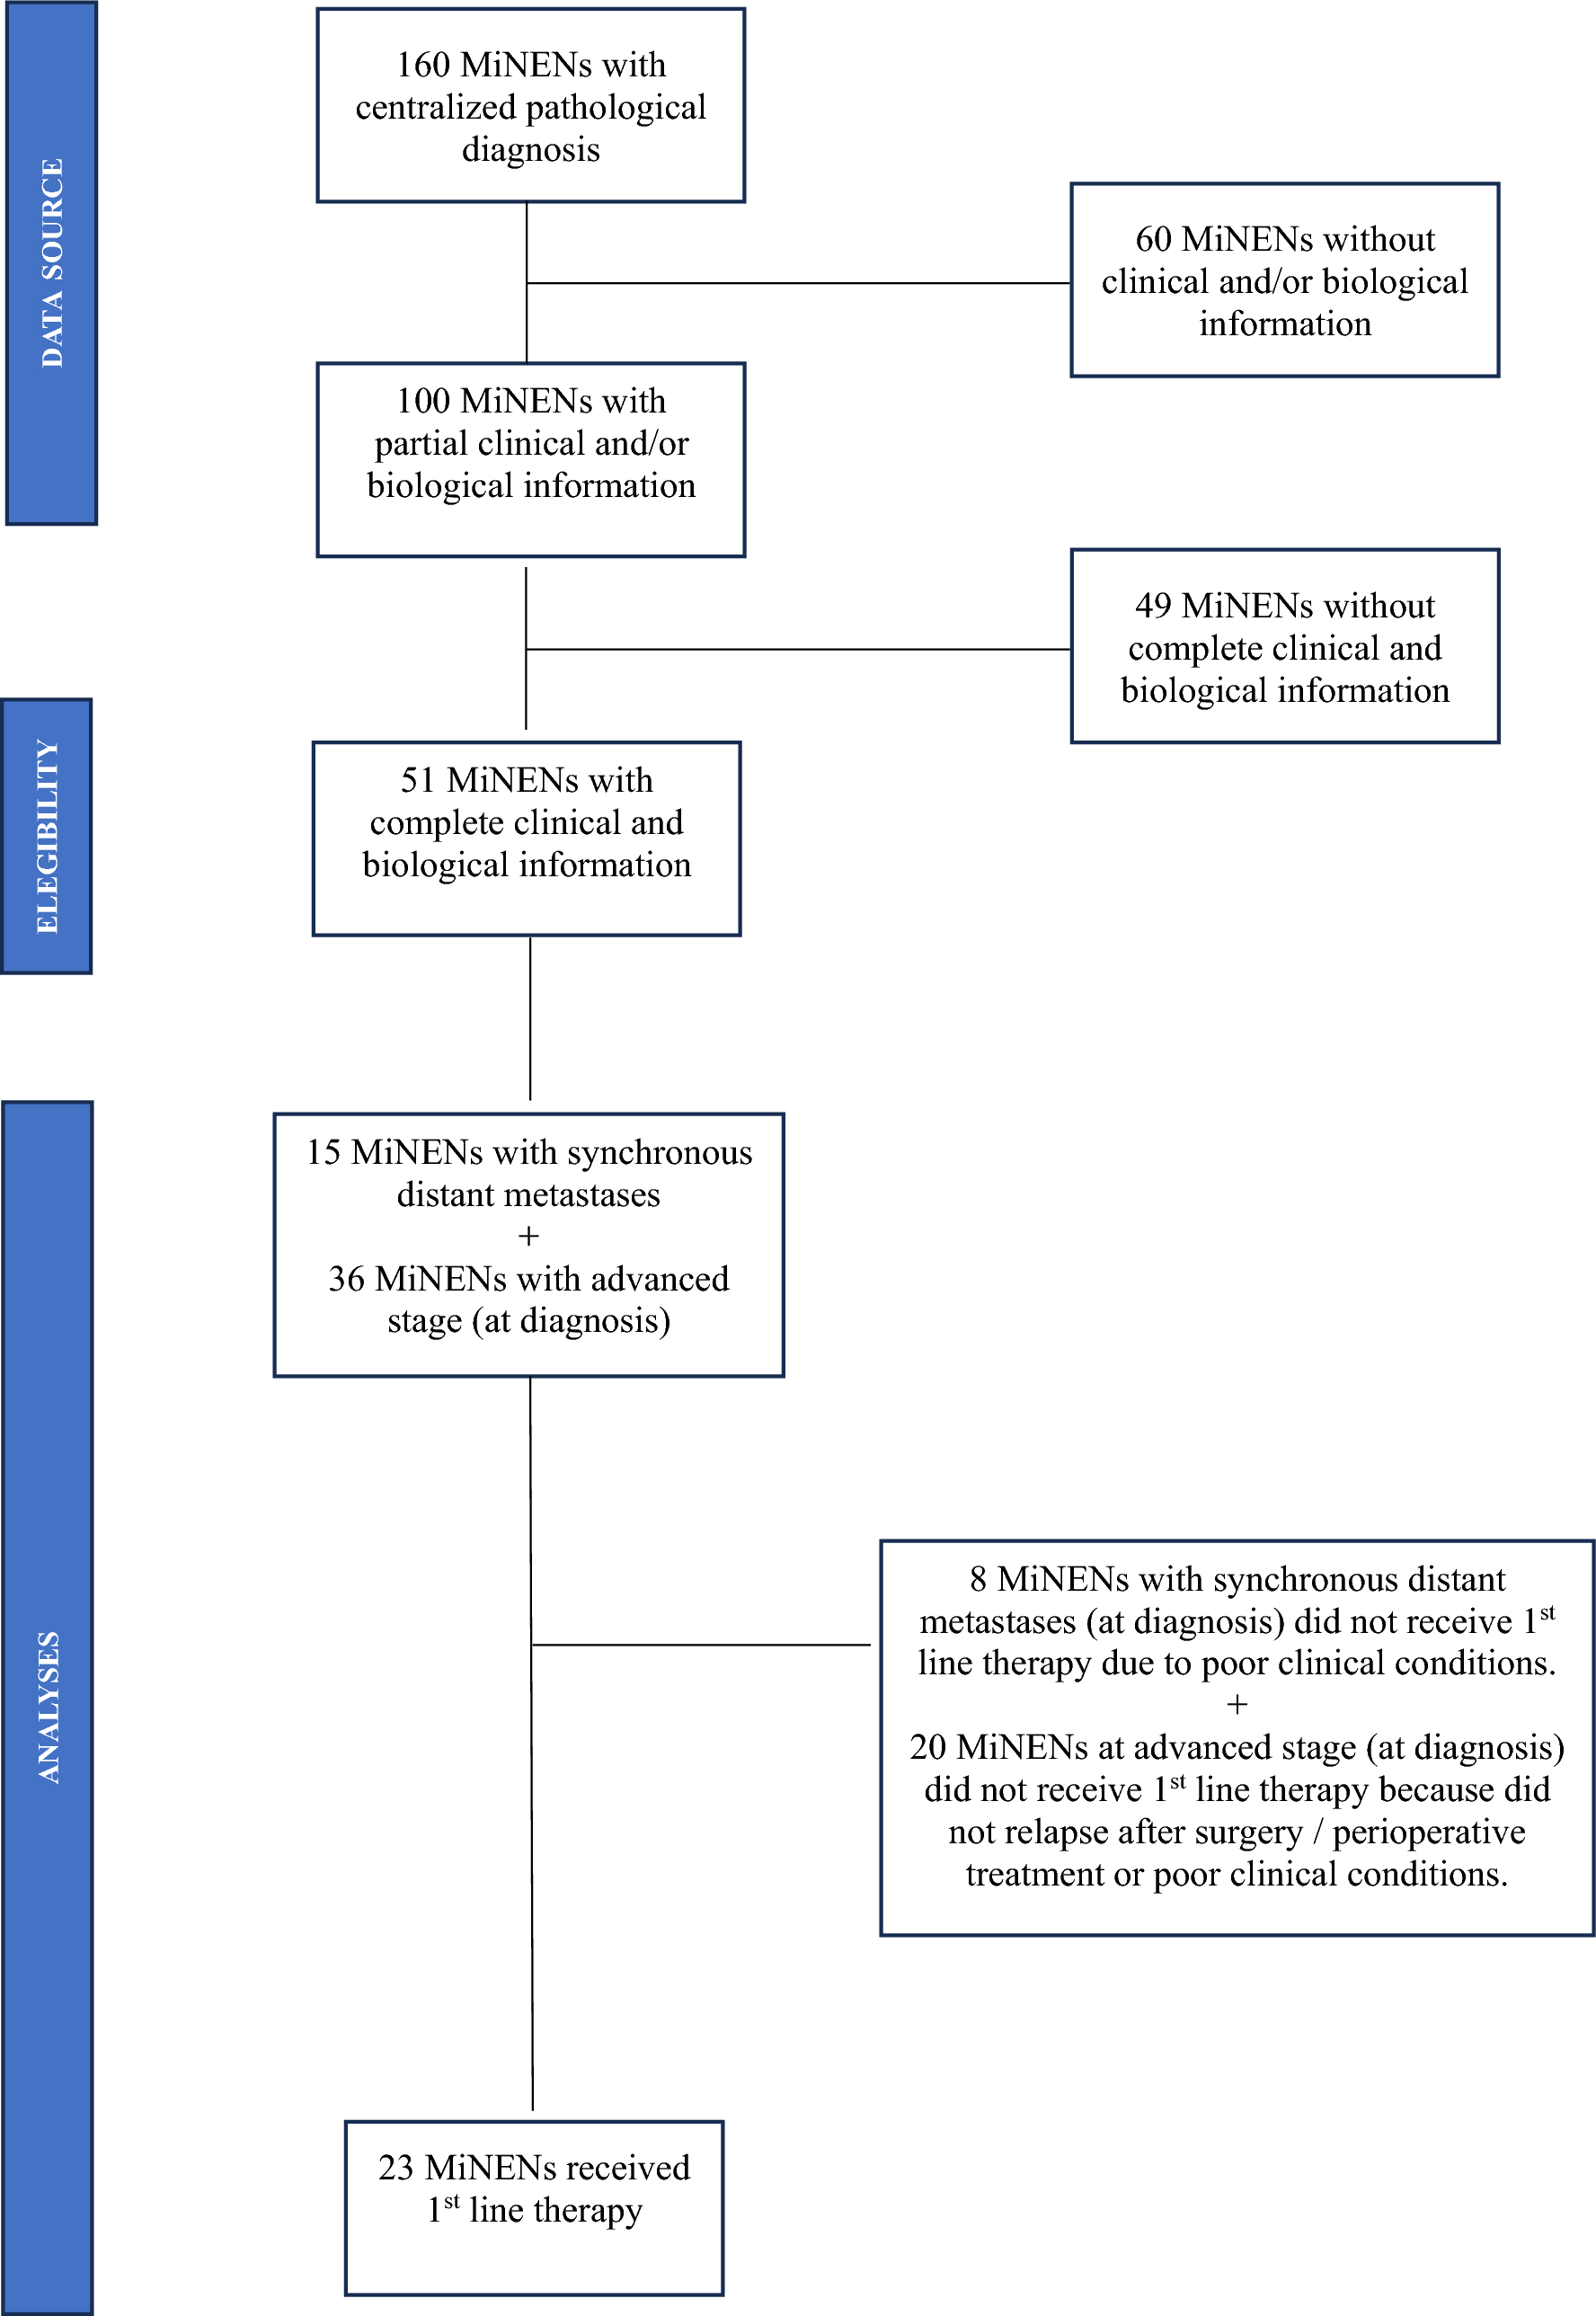 An Italian real-world multicenter study of patients with advanced mixed neuroendocrine non-neuroendocrine neoplasms (MiNENs) of the gastro-entero-pancreatic system treated with chemotherapy